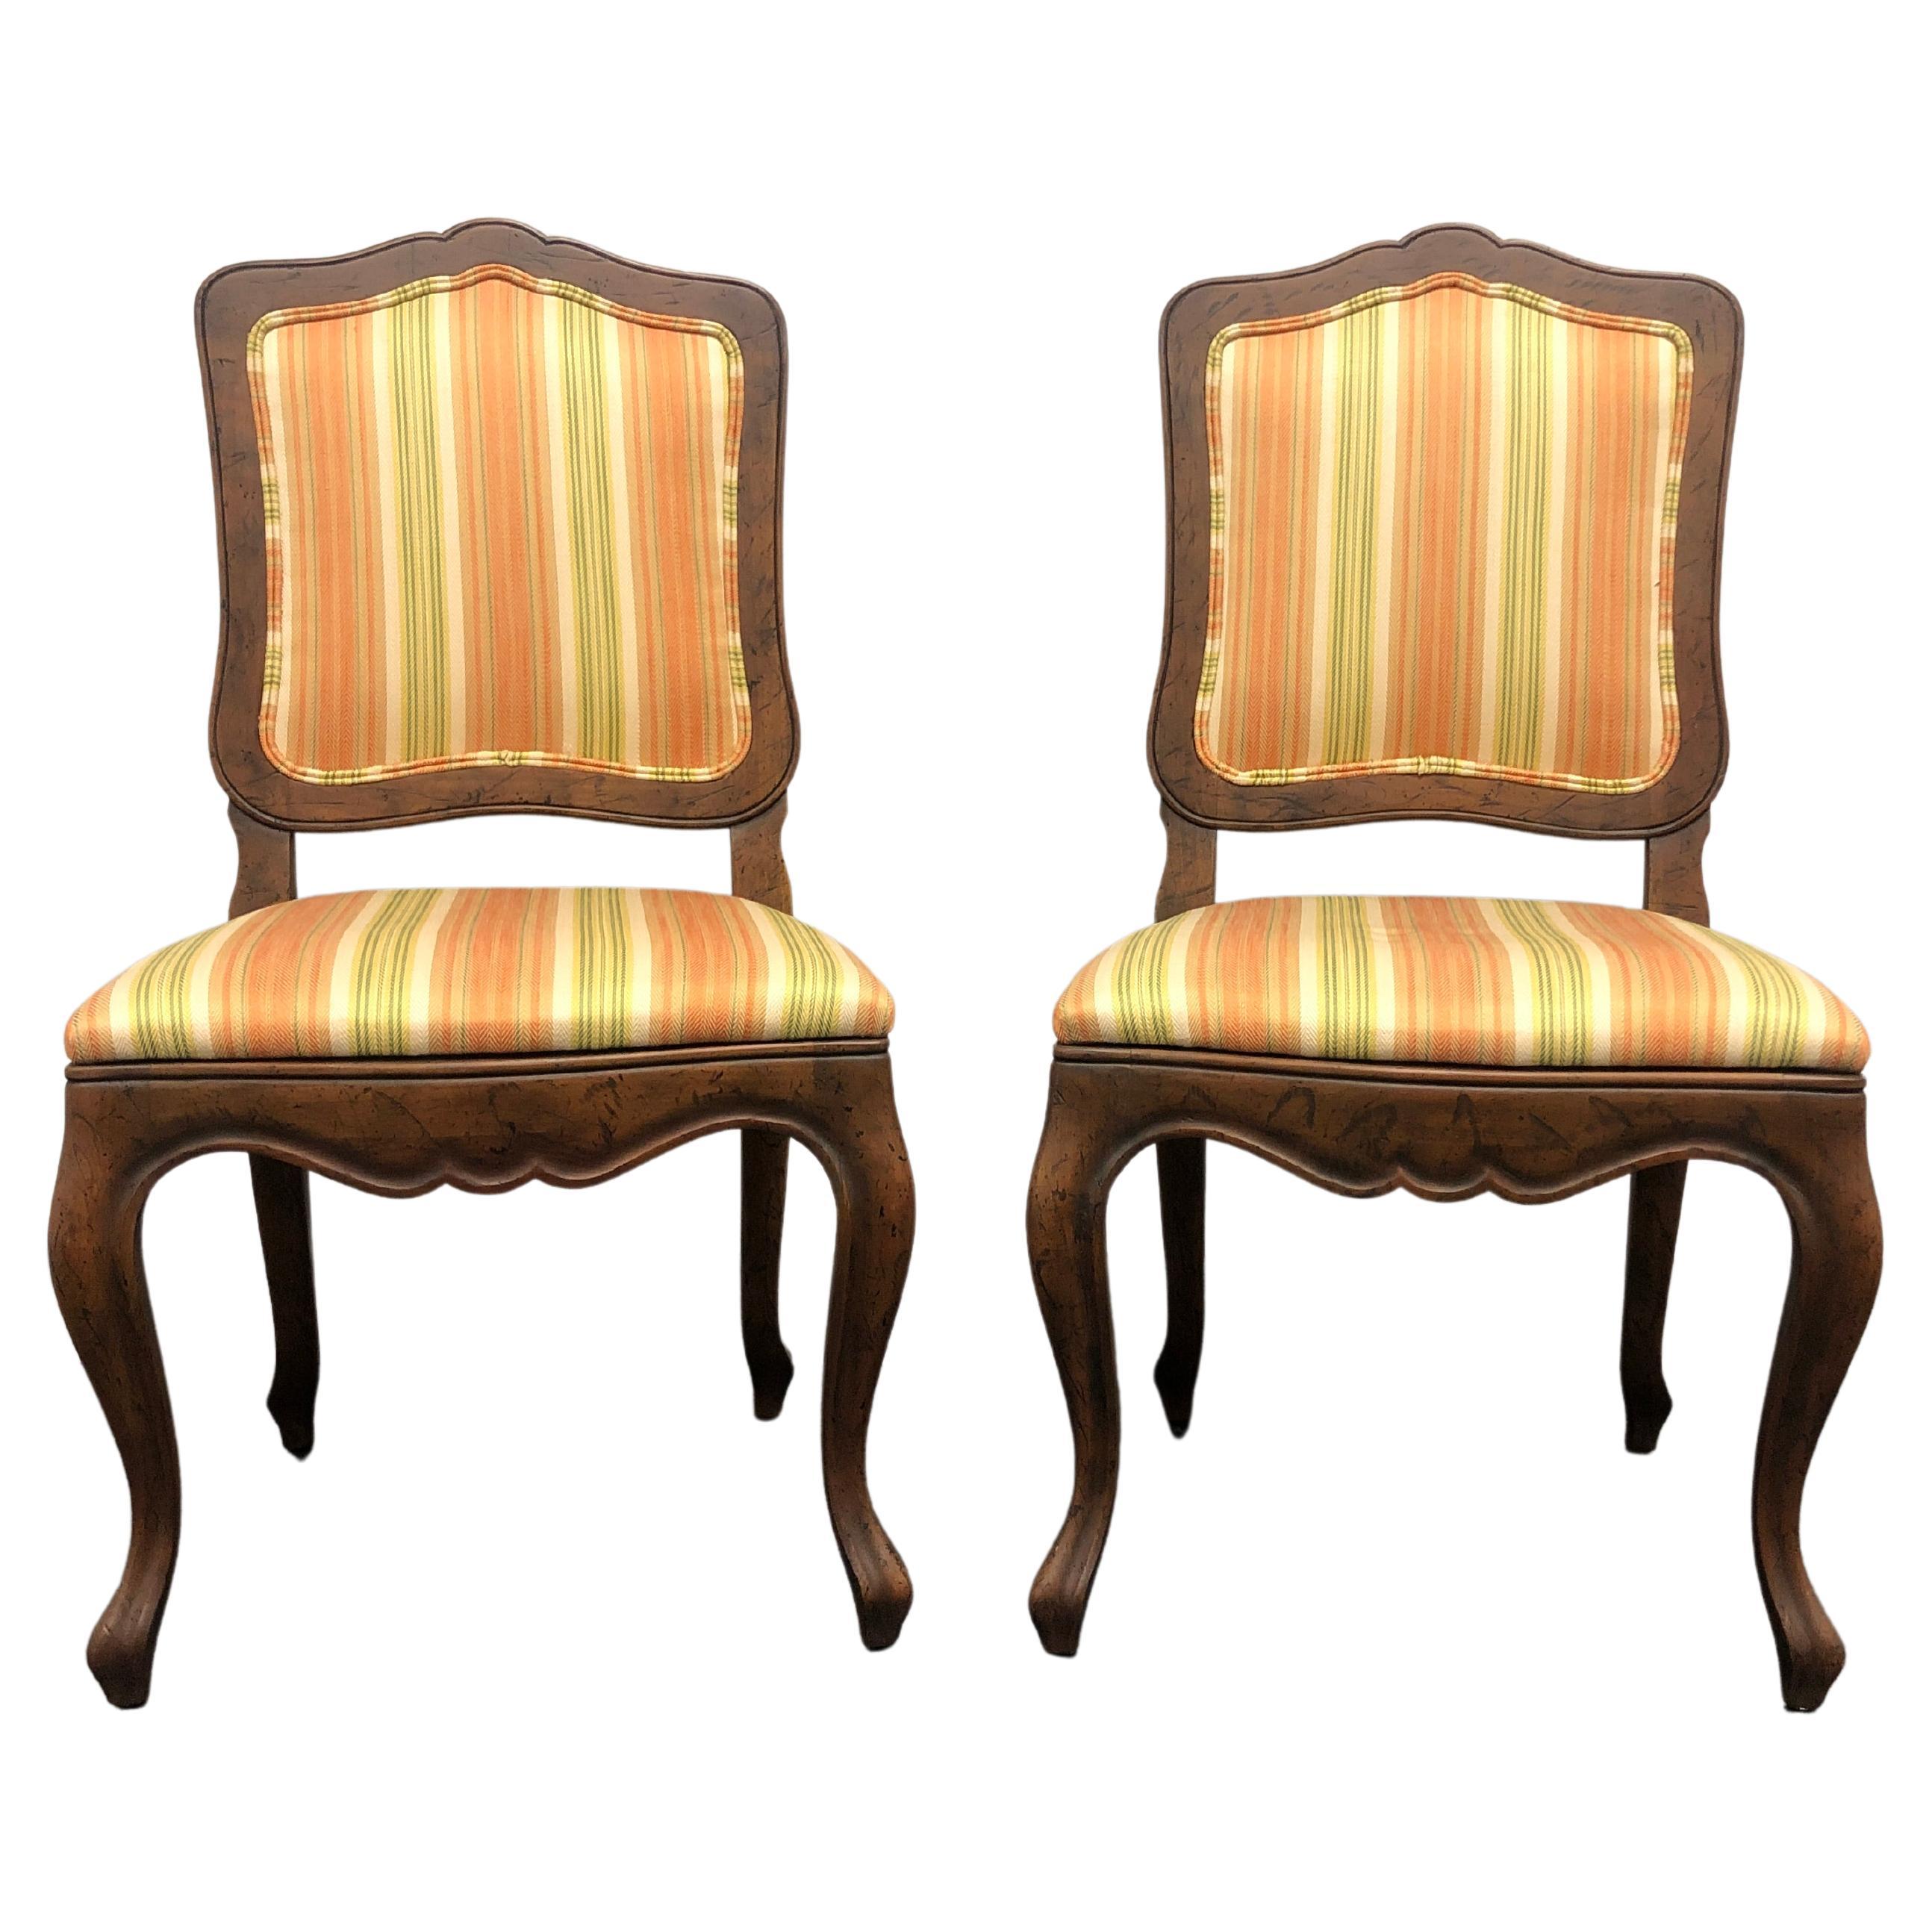 BAKER French Country Style Dining Side Chairs - Pair C